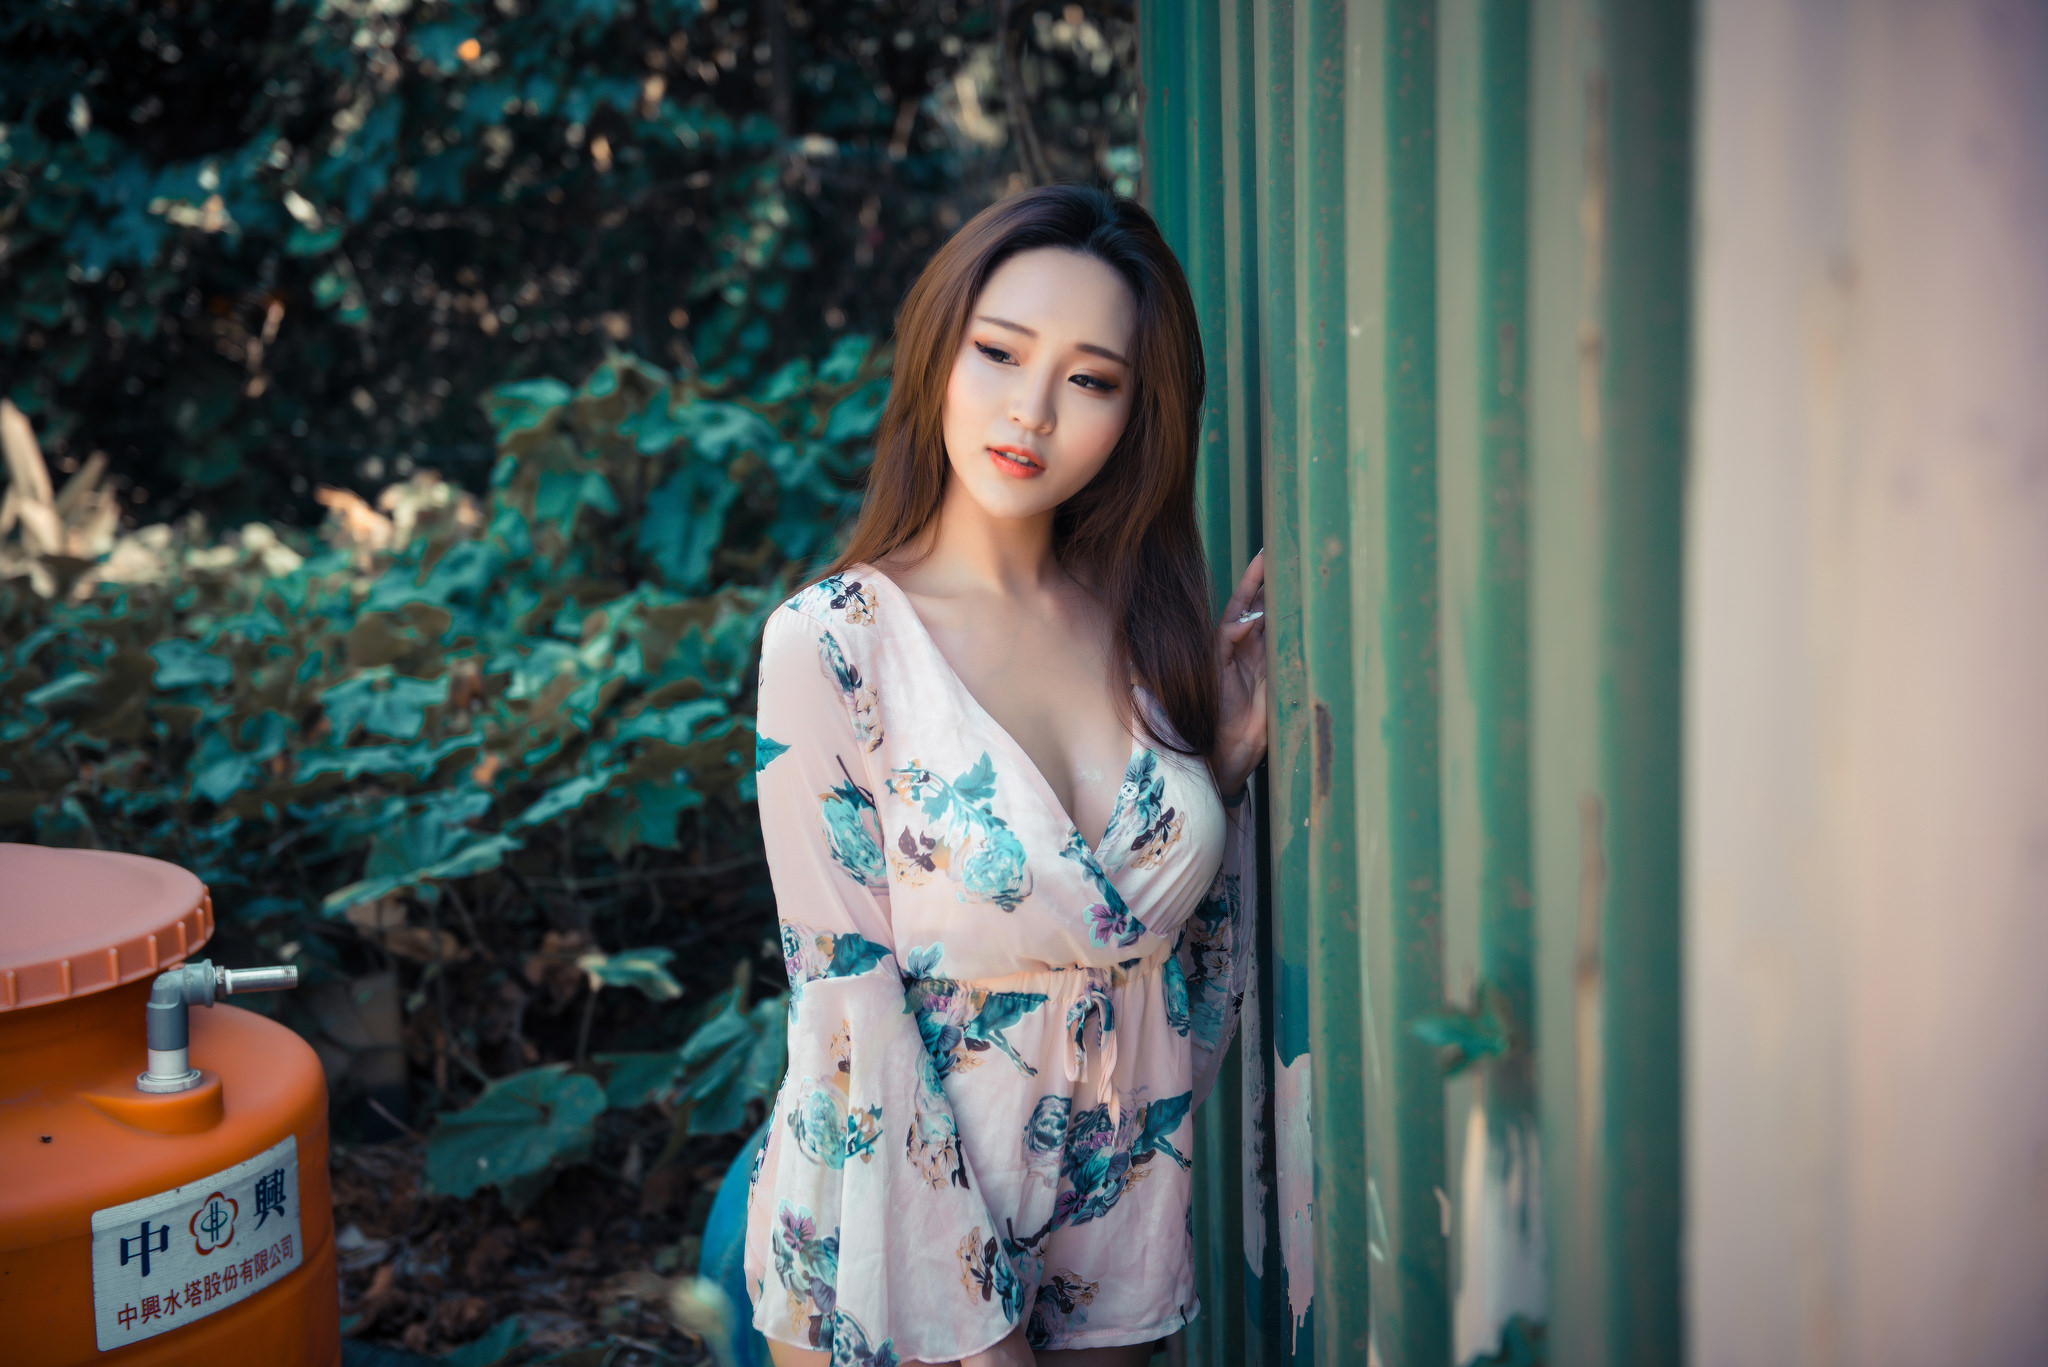 People 2048x1367 Asian women women outdoors brunette model plants cleavage playsuit looking away painted nails